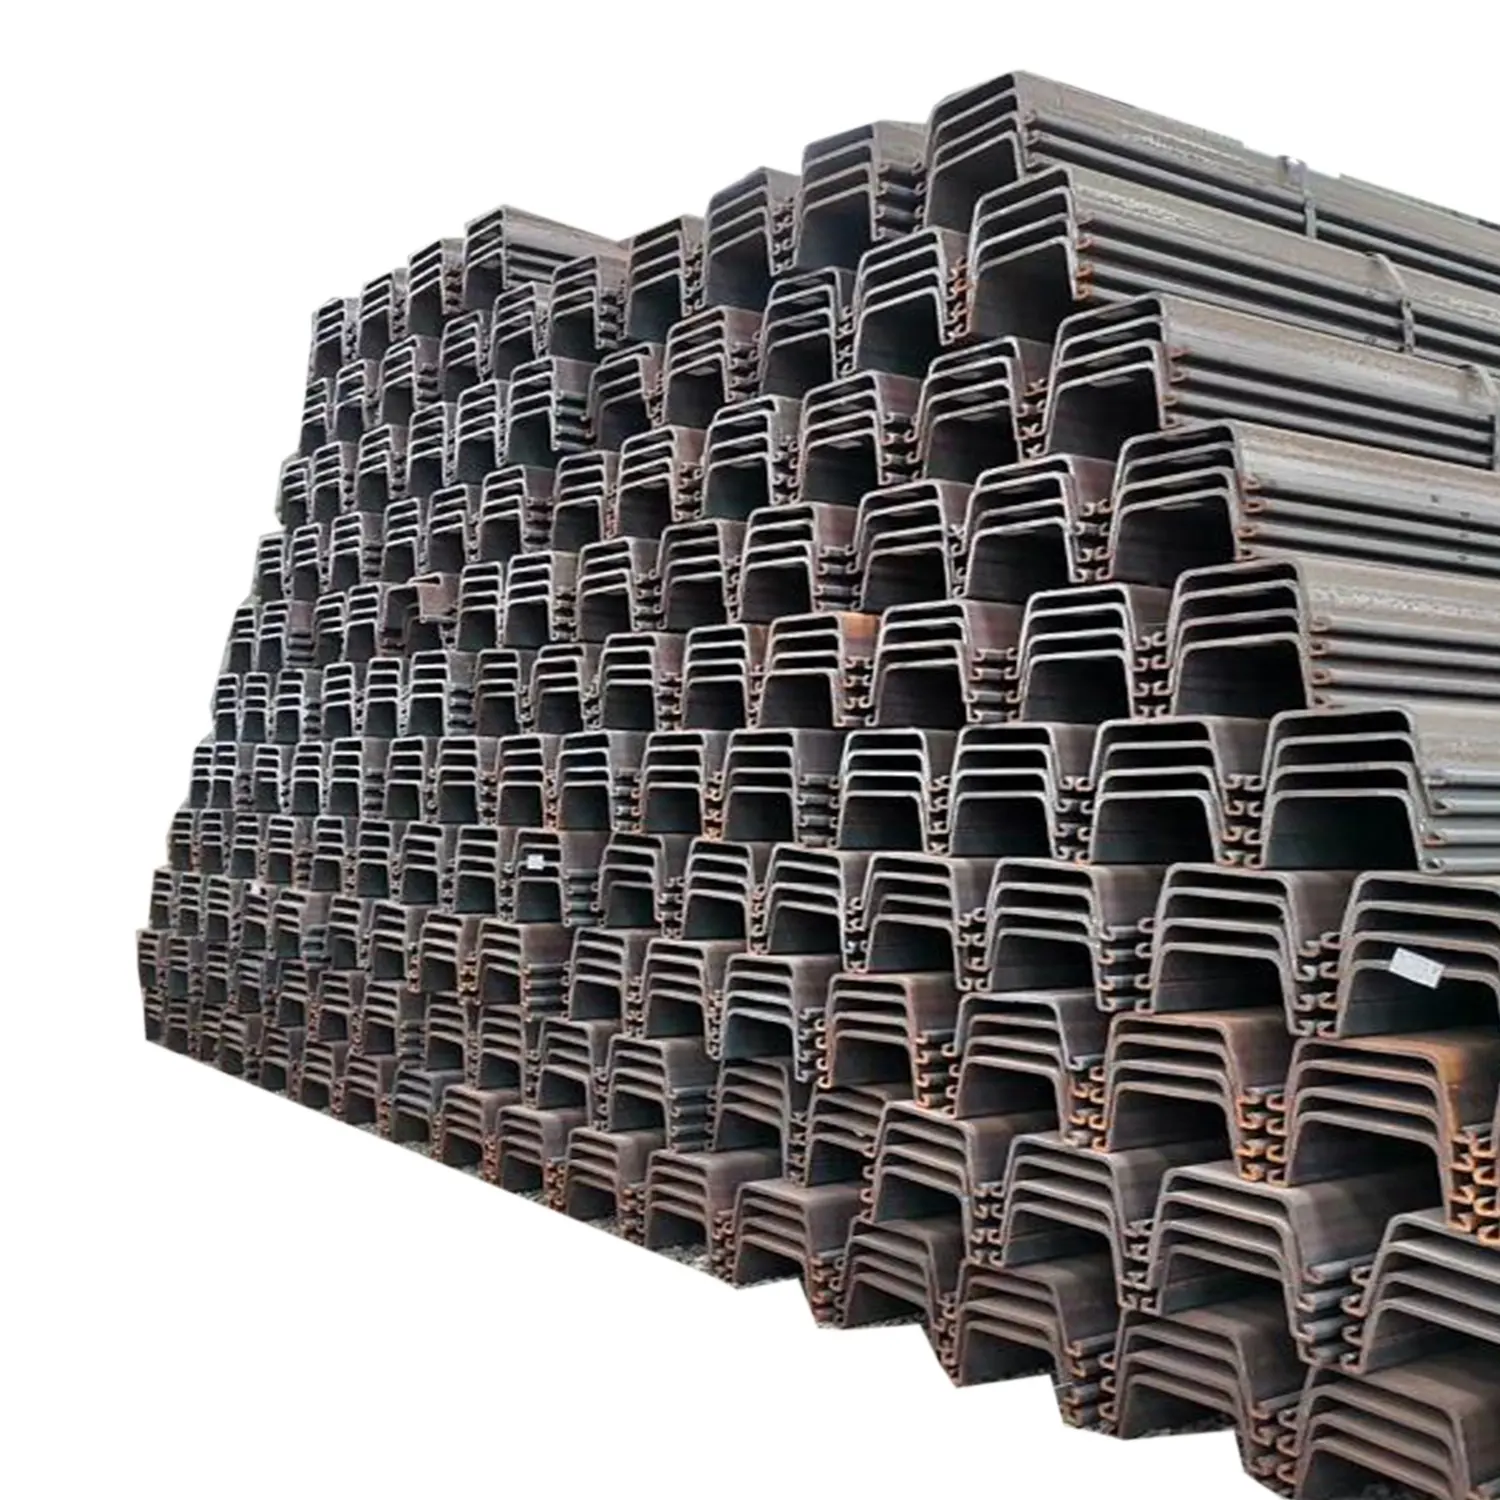 Interlocking trench sheets pile corrosion protection sheet piling cost per foot sheet pile